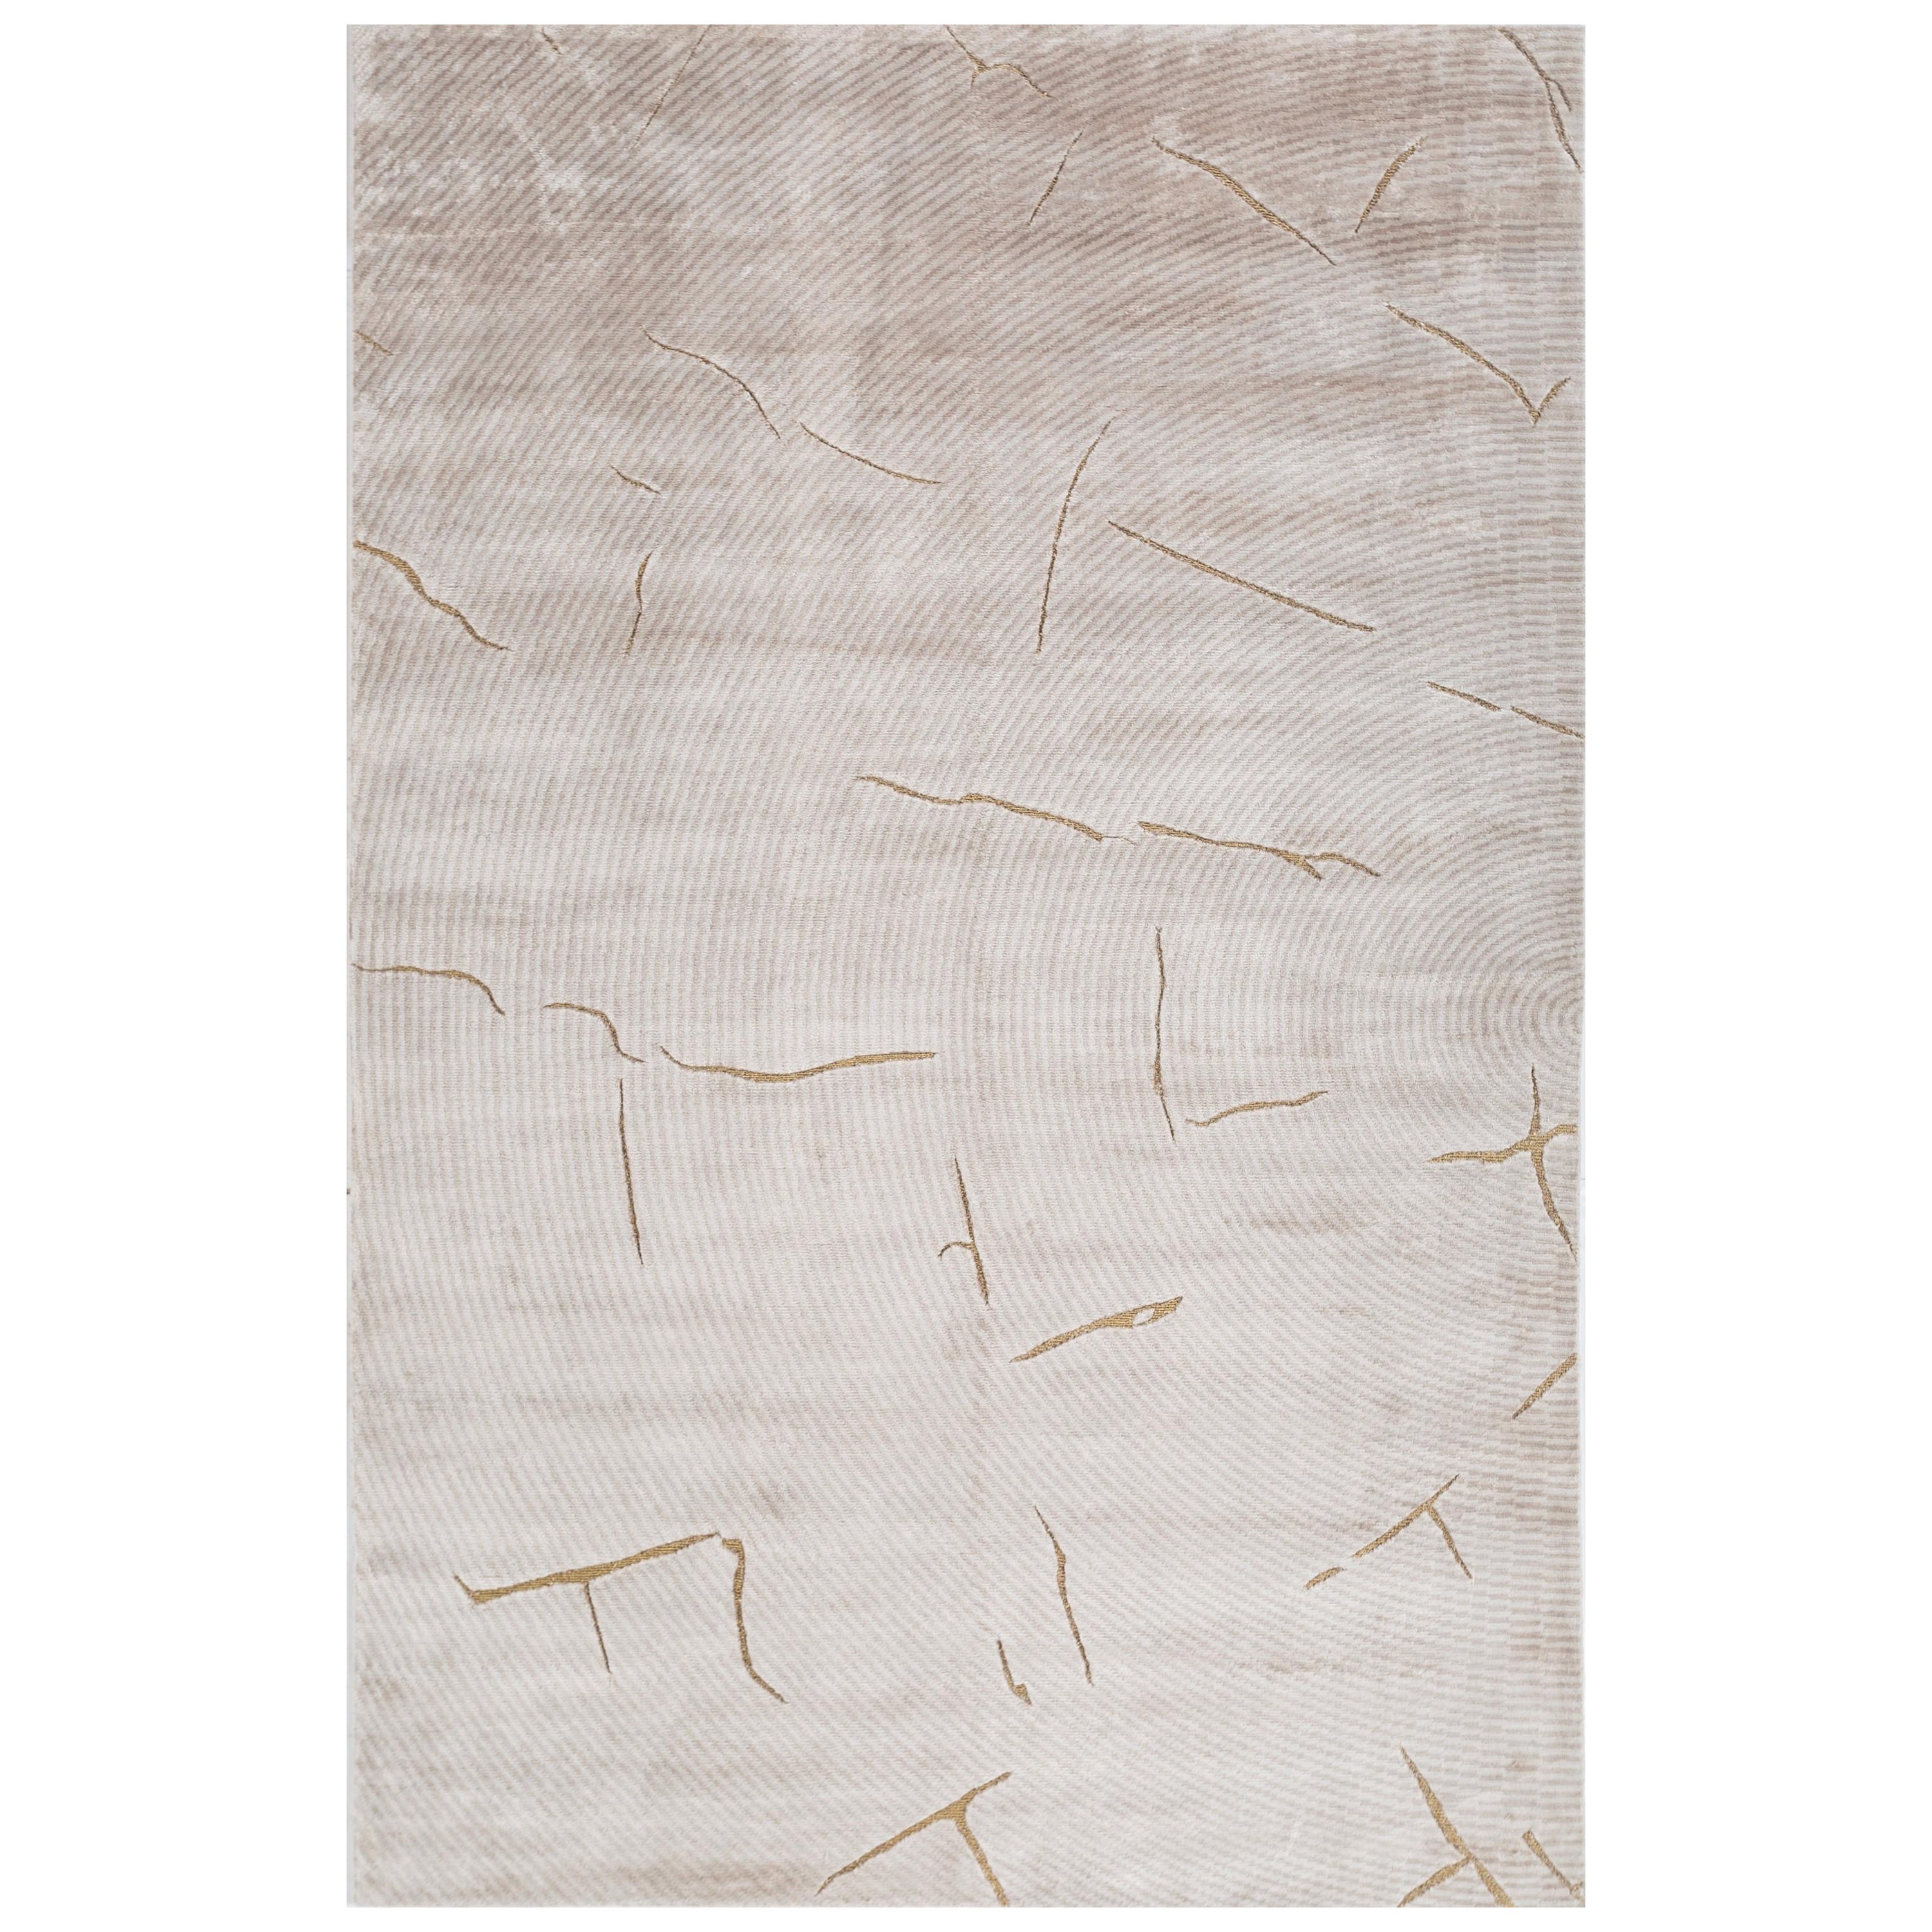 Luminous Mosaic White Sand Marble 180X270 cm Hand-Knotted Rug For Sale